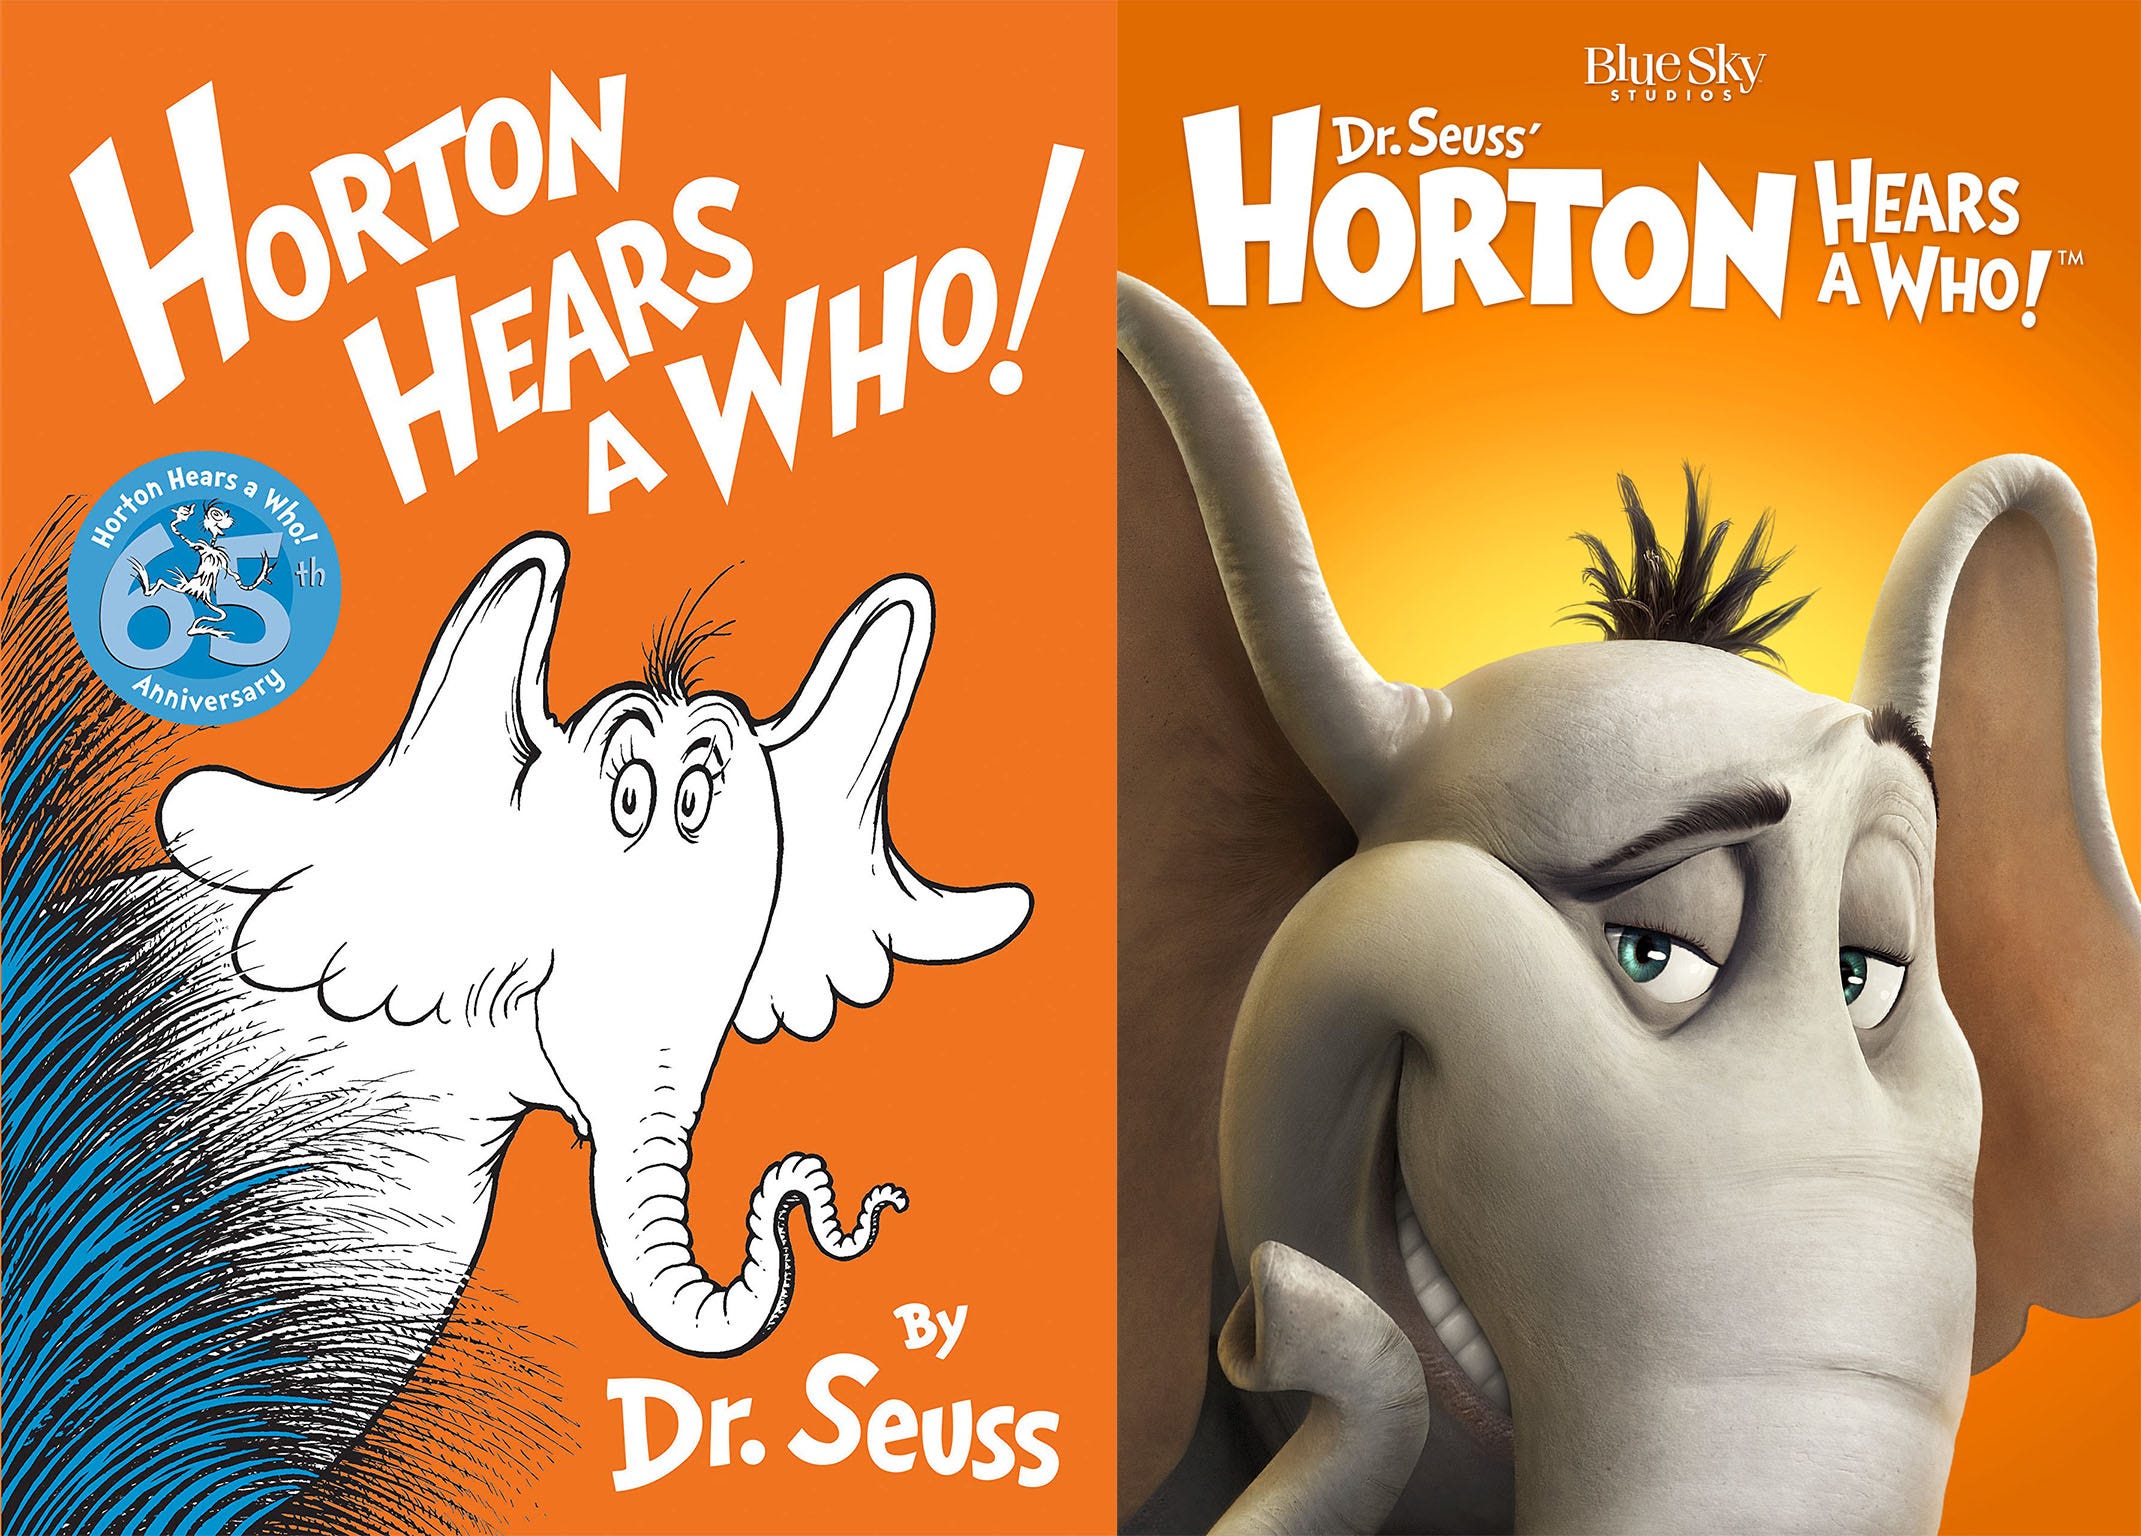 Updated Intro to “Horton Hears a Racist”